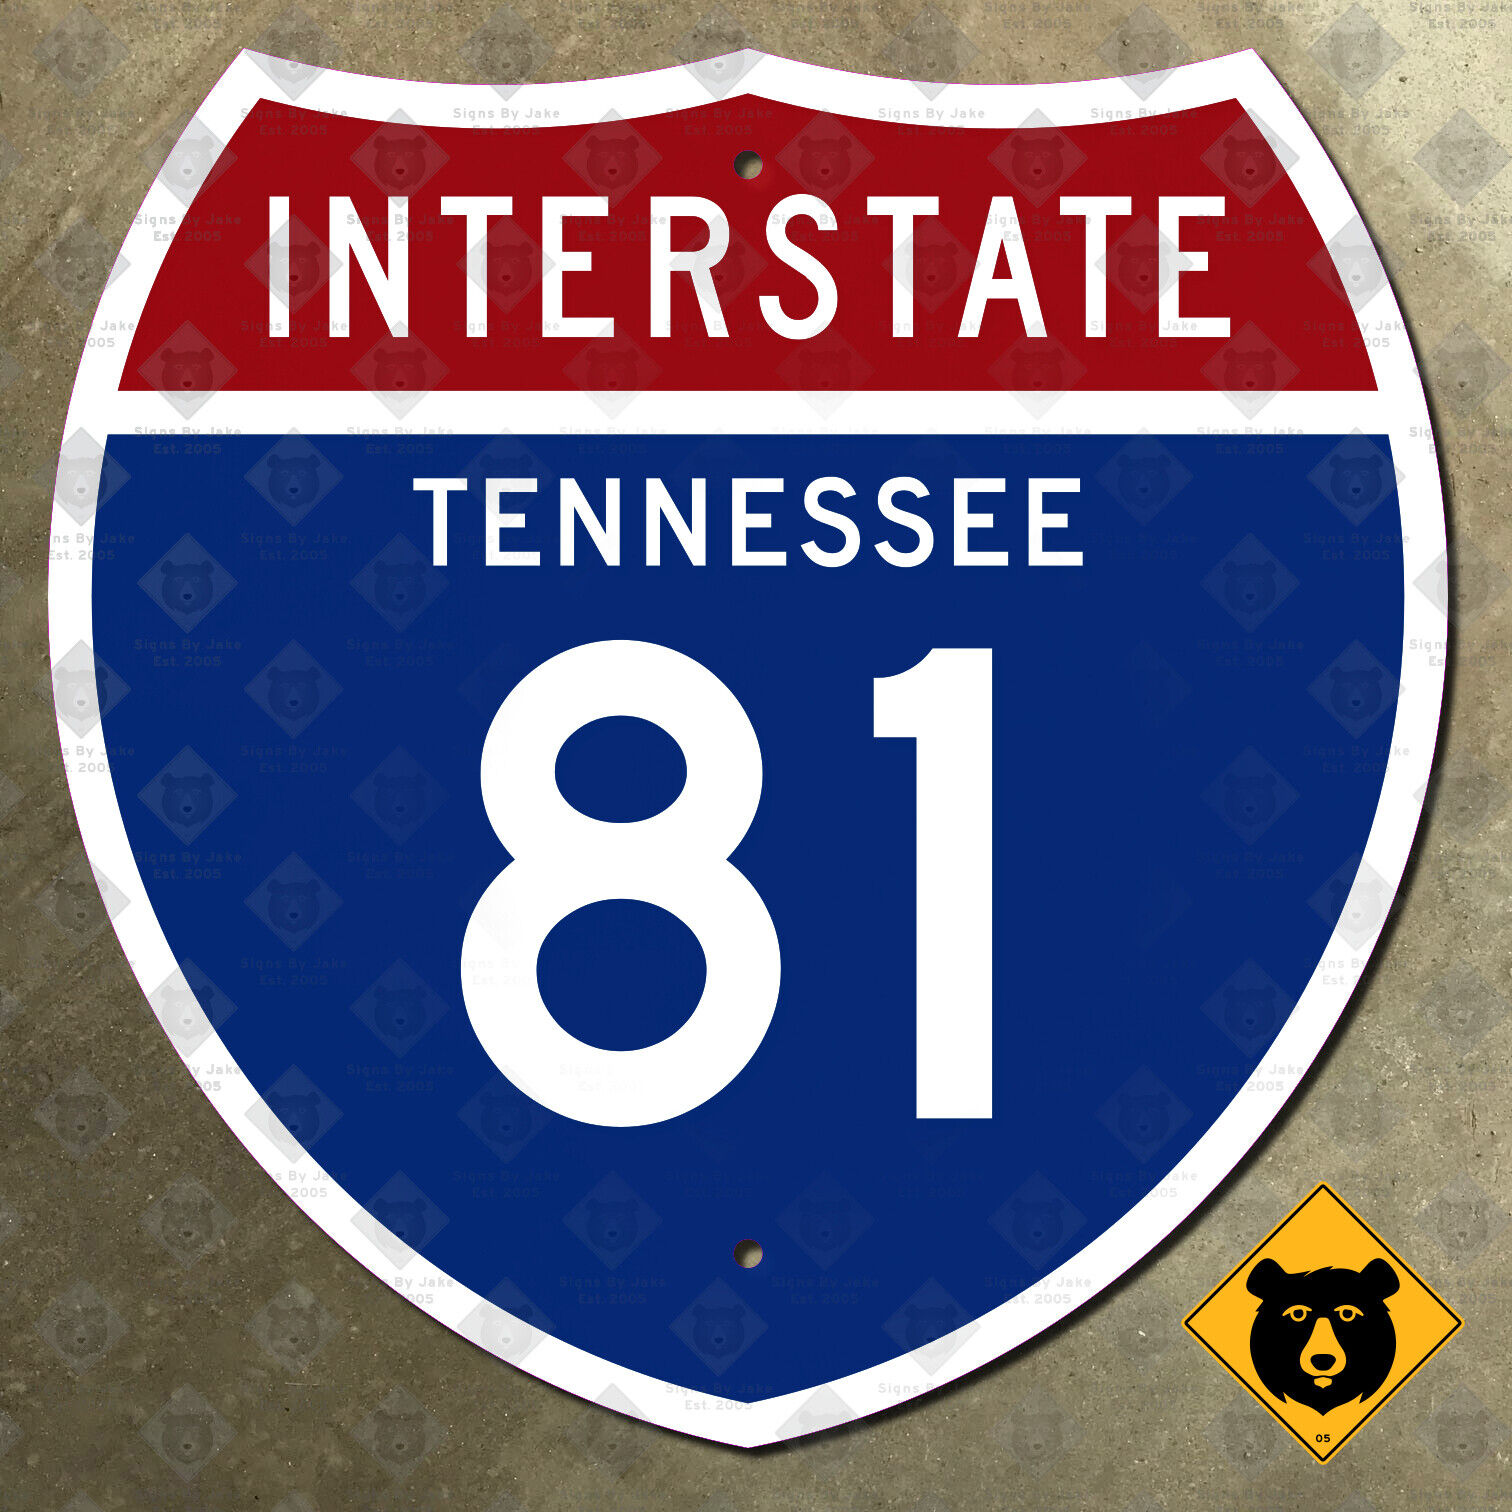 Tennessee Interstate 81 highway route sign 1961 Knoxville Bristol 12x12